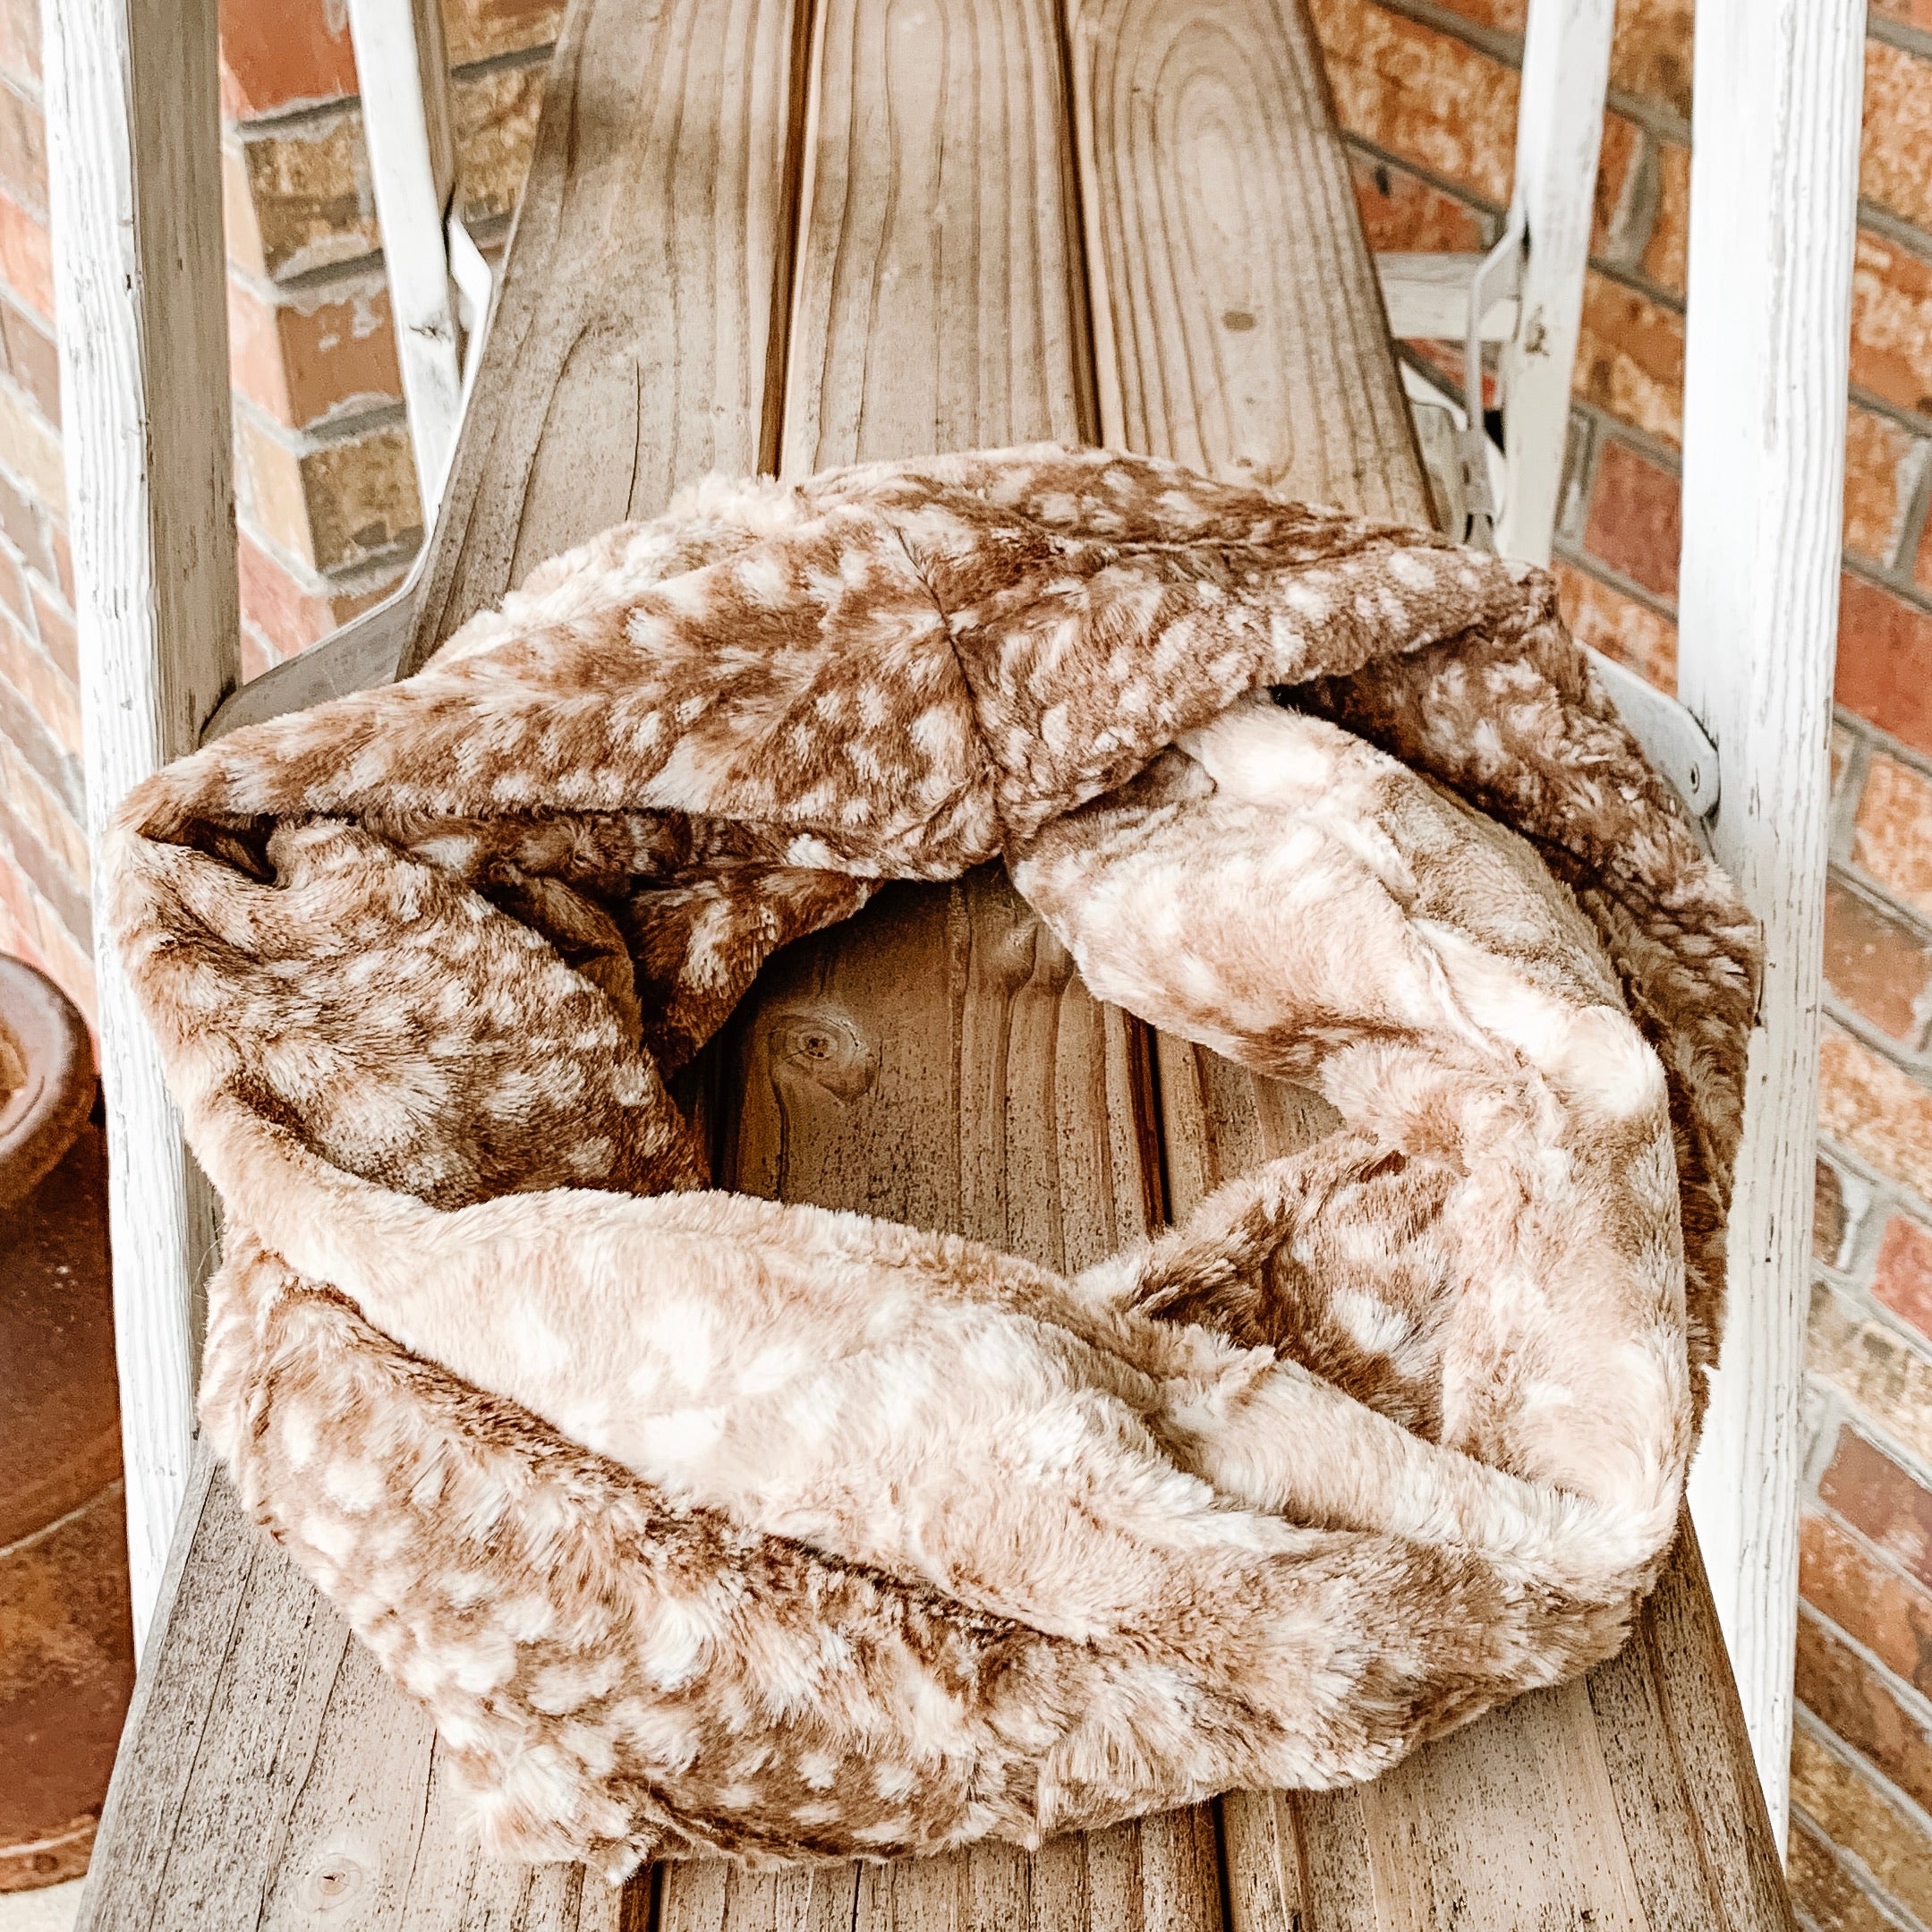 Luxe Minky Adult Infinity Scarves - Ready to Ship